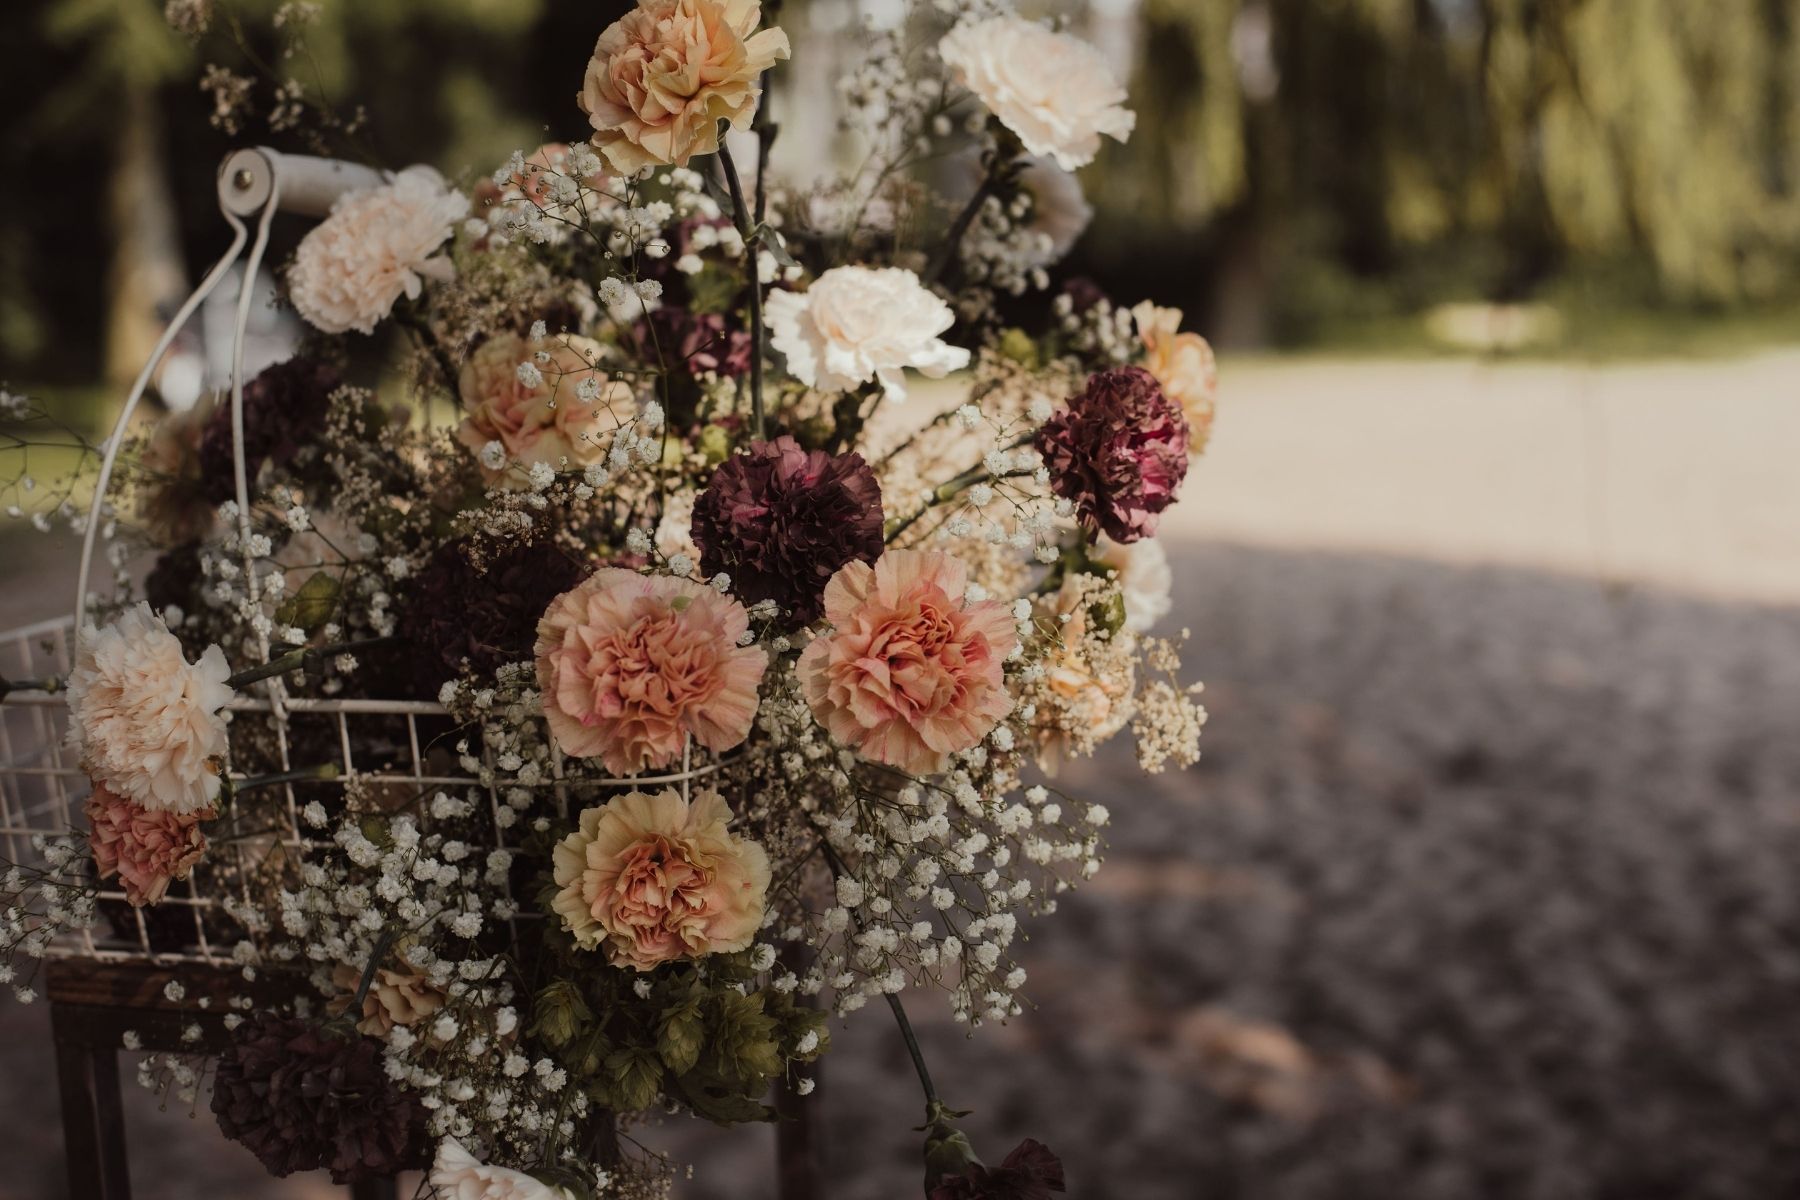 Inspirational Shoot With Gorgeous Decofresh Roses and Carnations - Blog on Thursd (14)